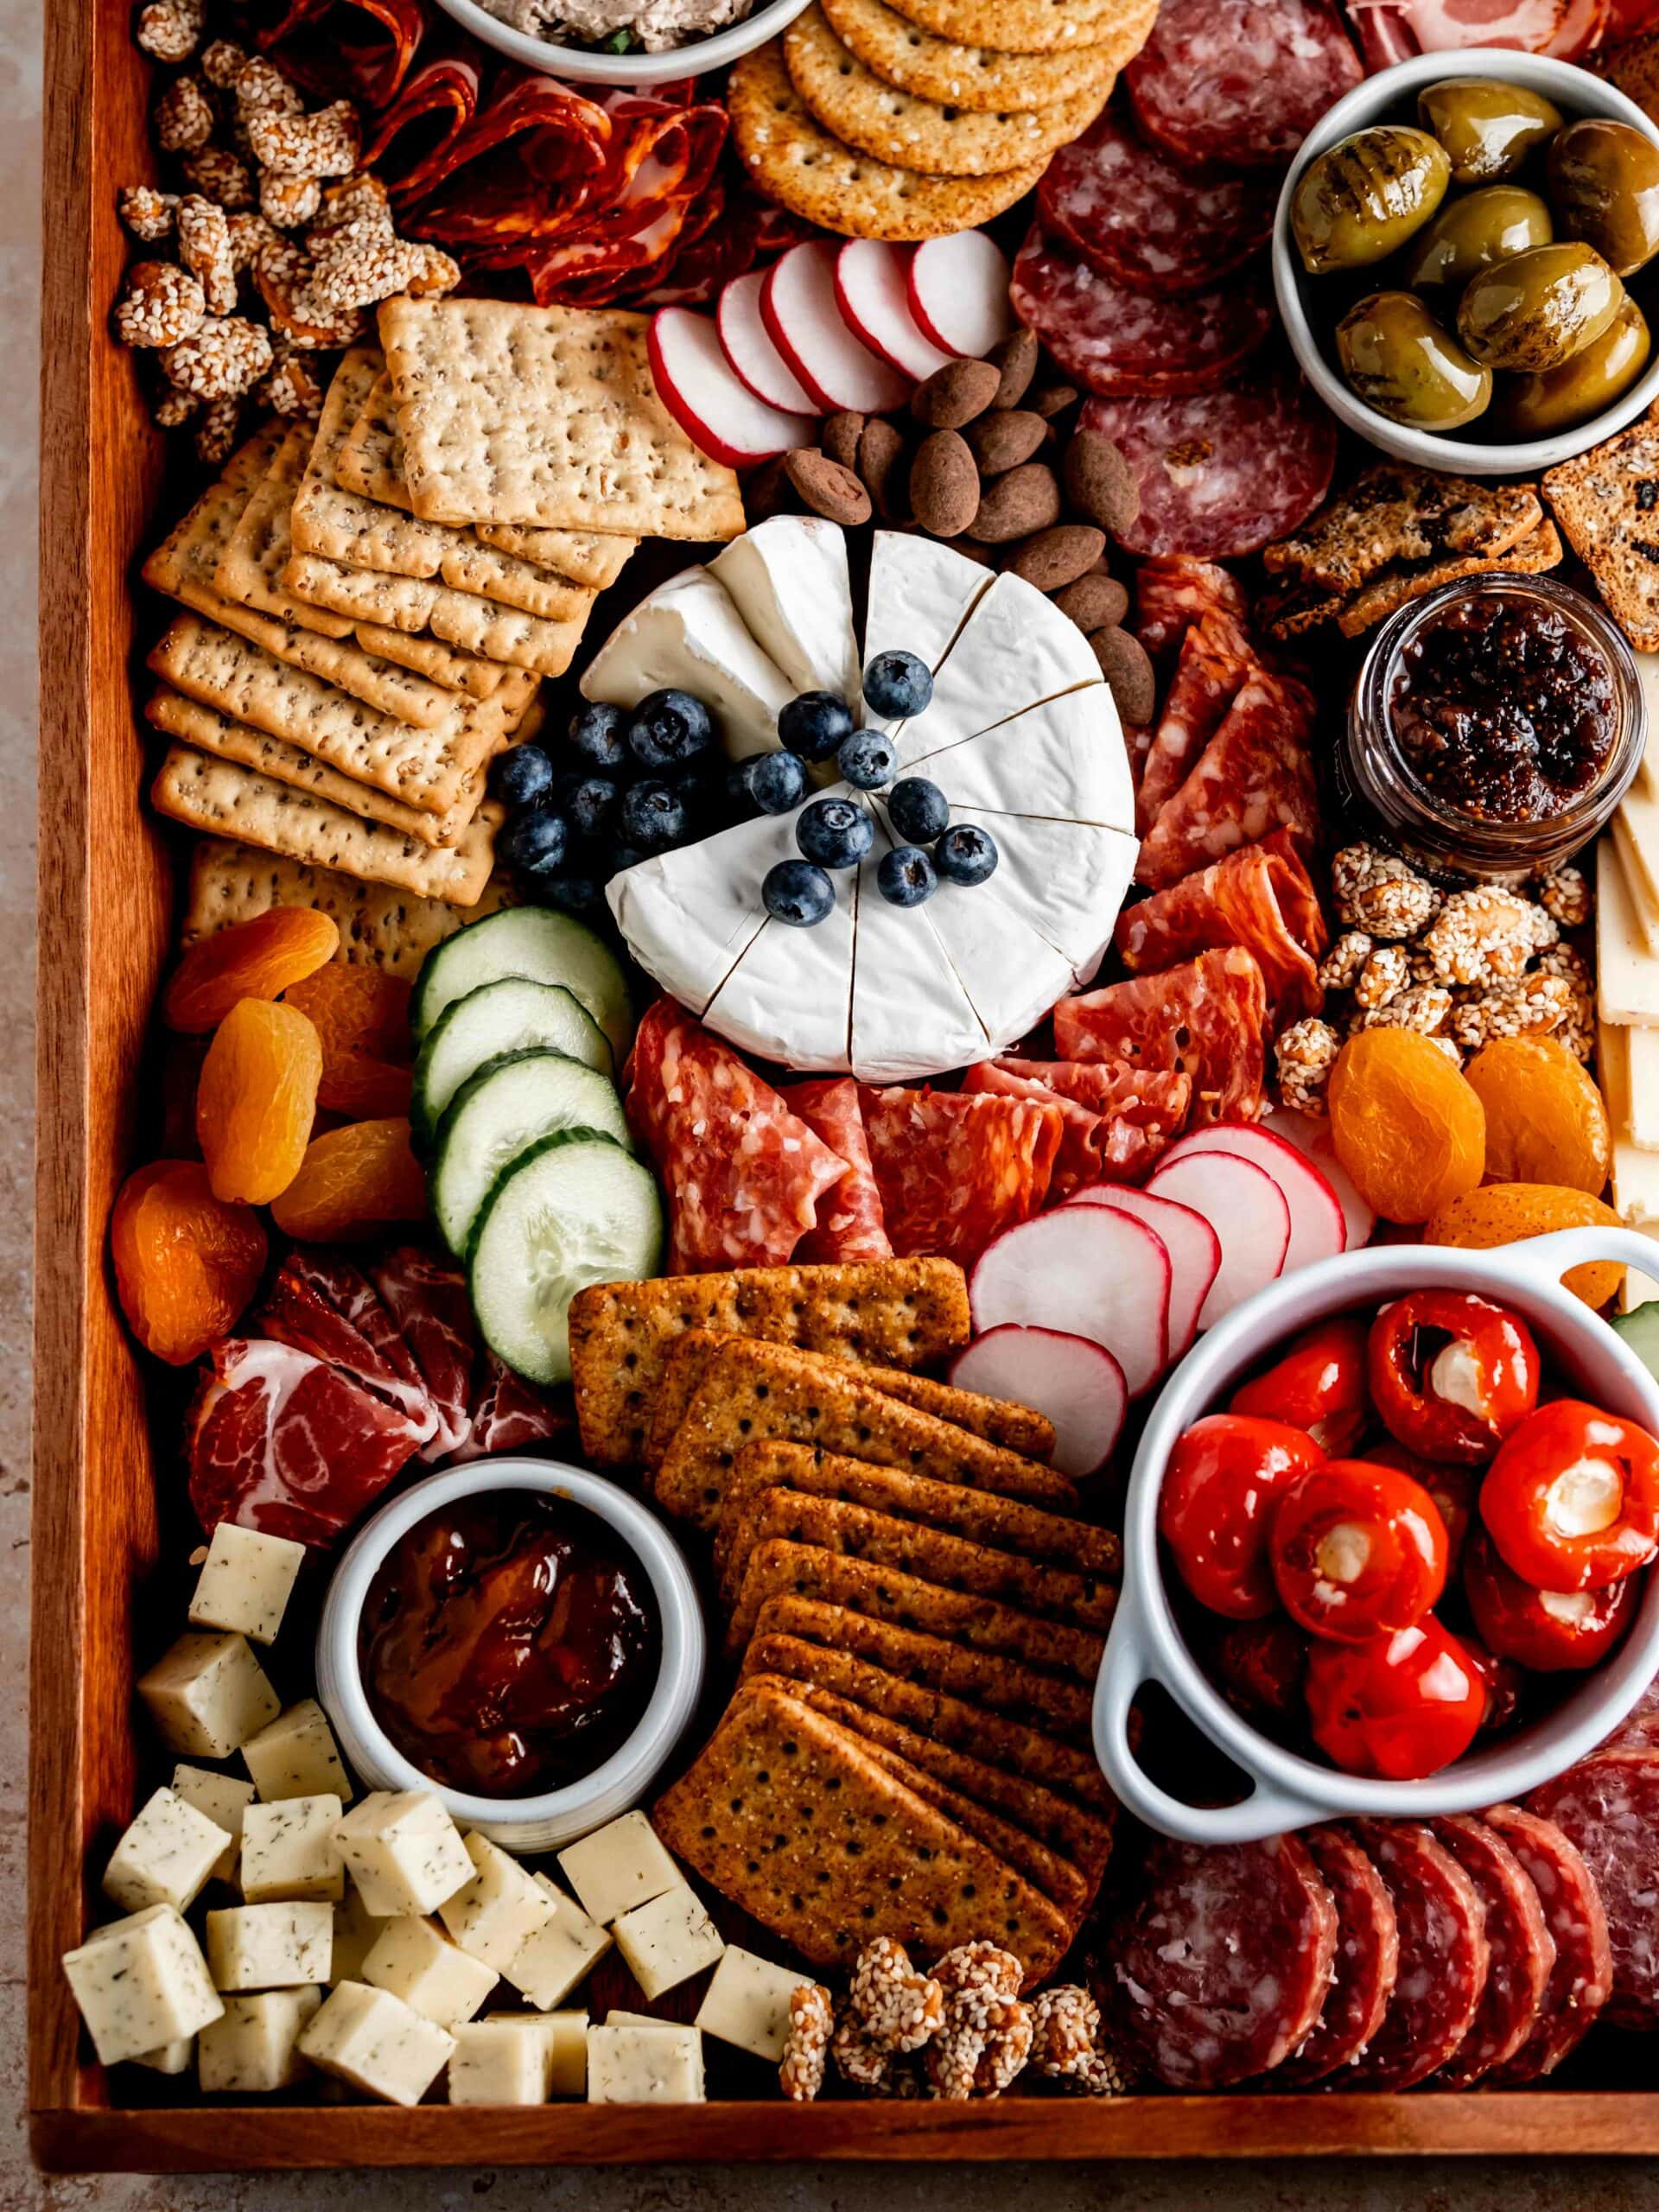 Homemade charcuterie board with cured meats, creamy cheeses, crackers, olives, jams, candied nuts and more!